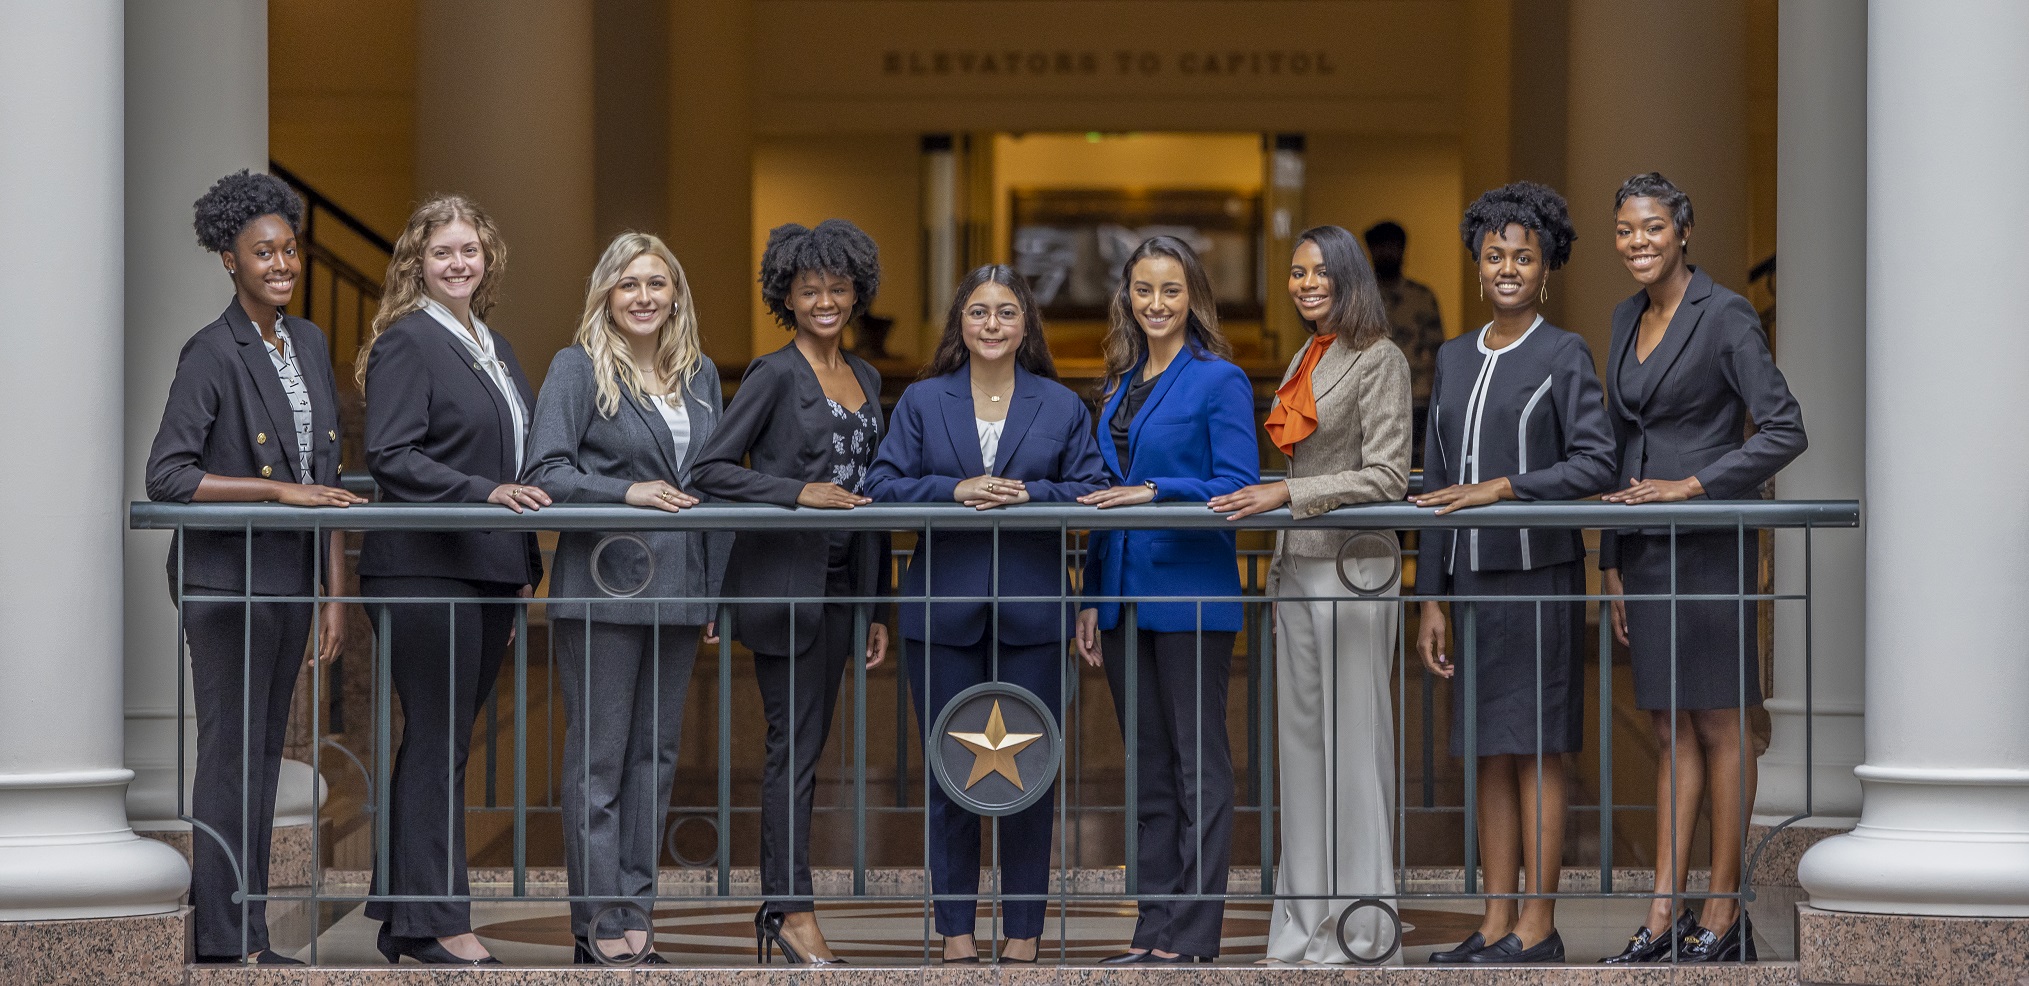 LEAP Center students intern for the capital during the 87th Texas Legislature